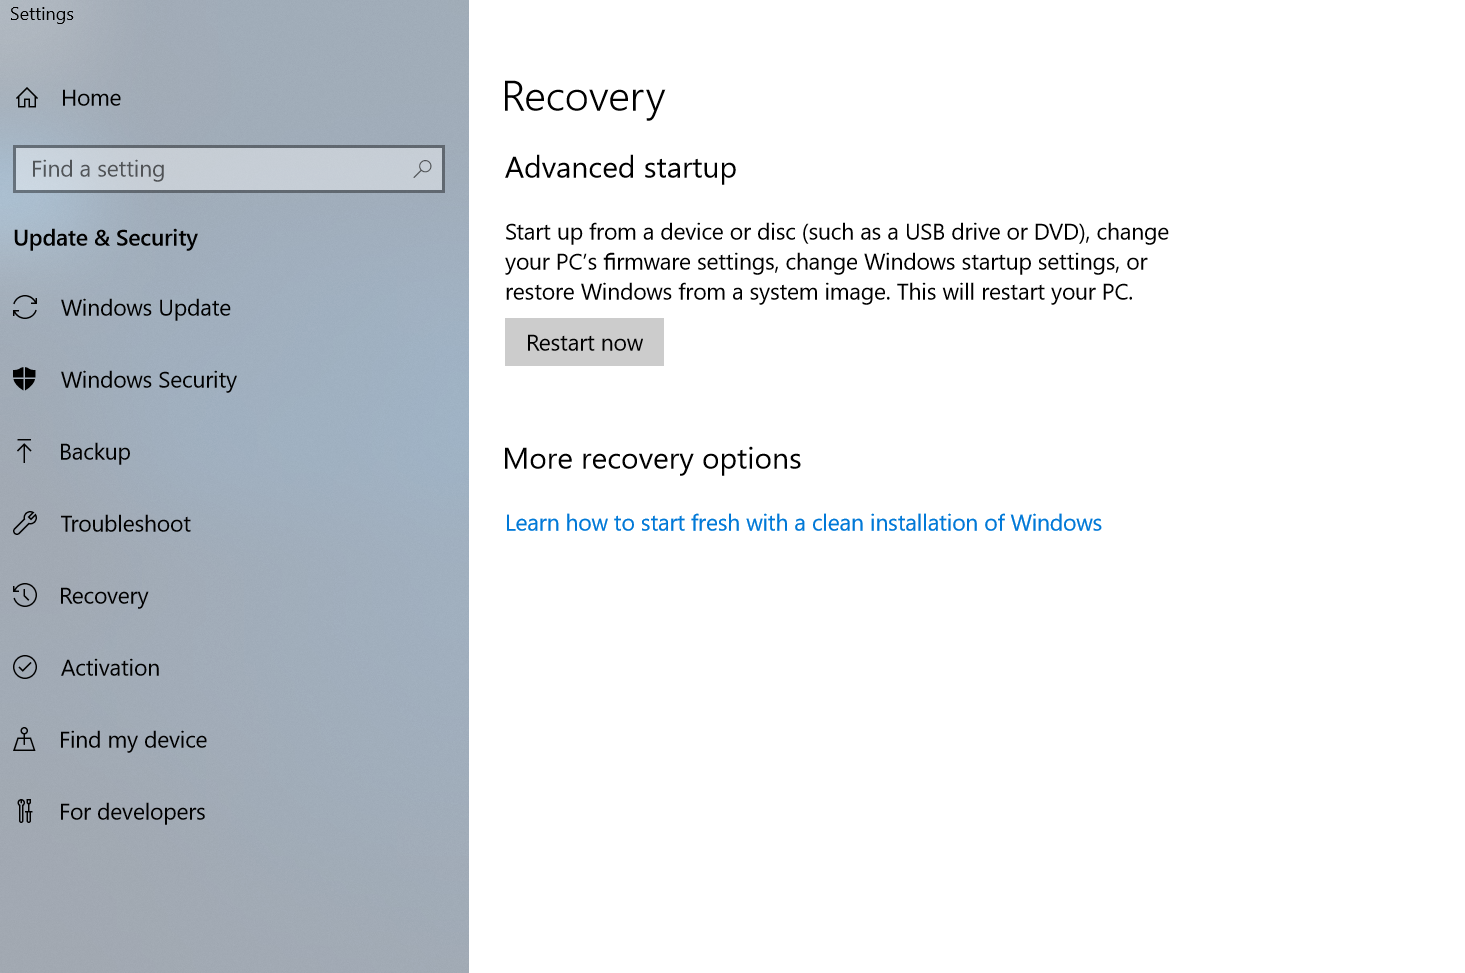 "Reset this PC" option missing on Recovery menu 0ac0458f-0712-41b7-a97e-6461b1185753?upload=true.png